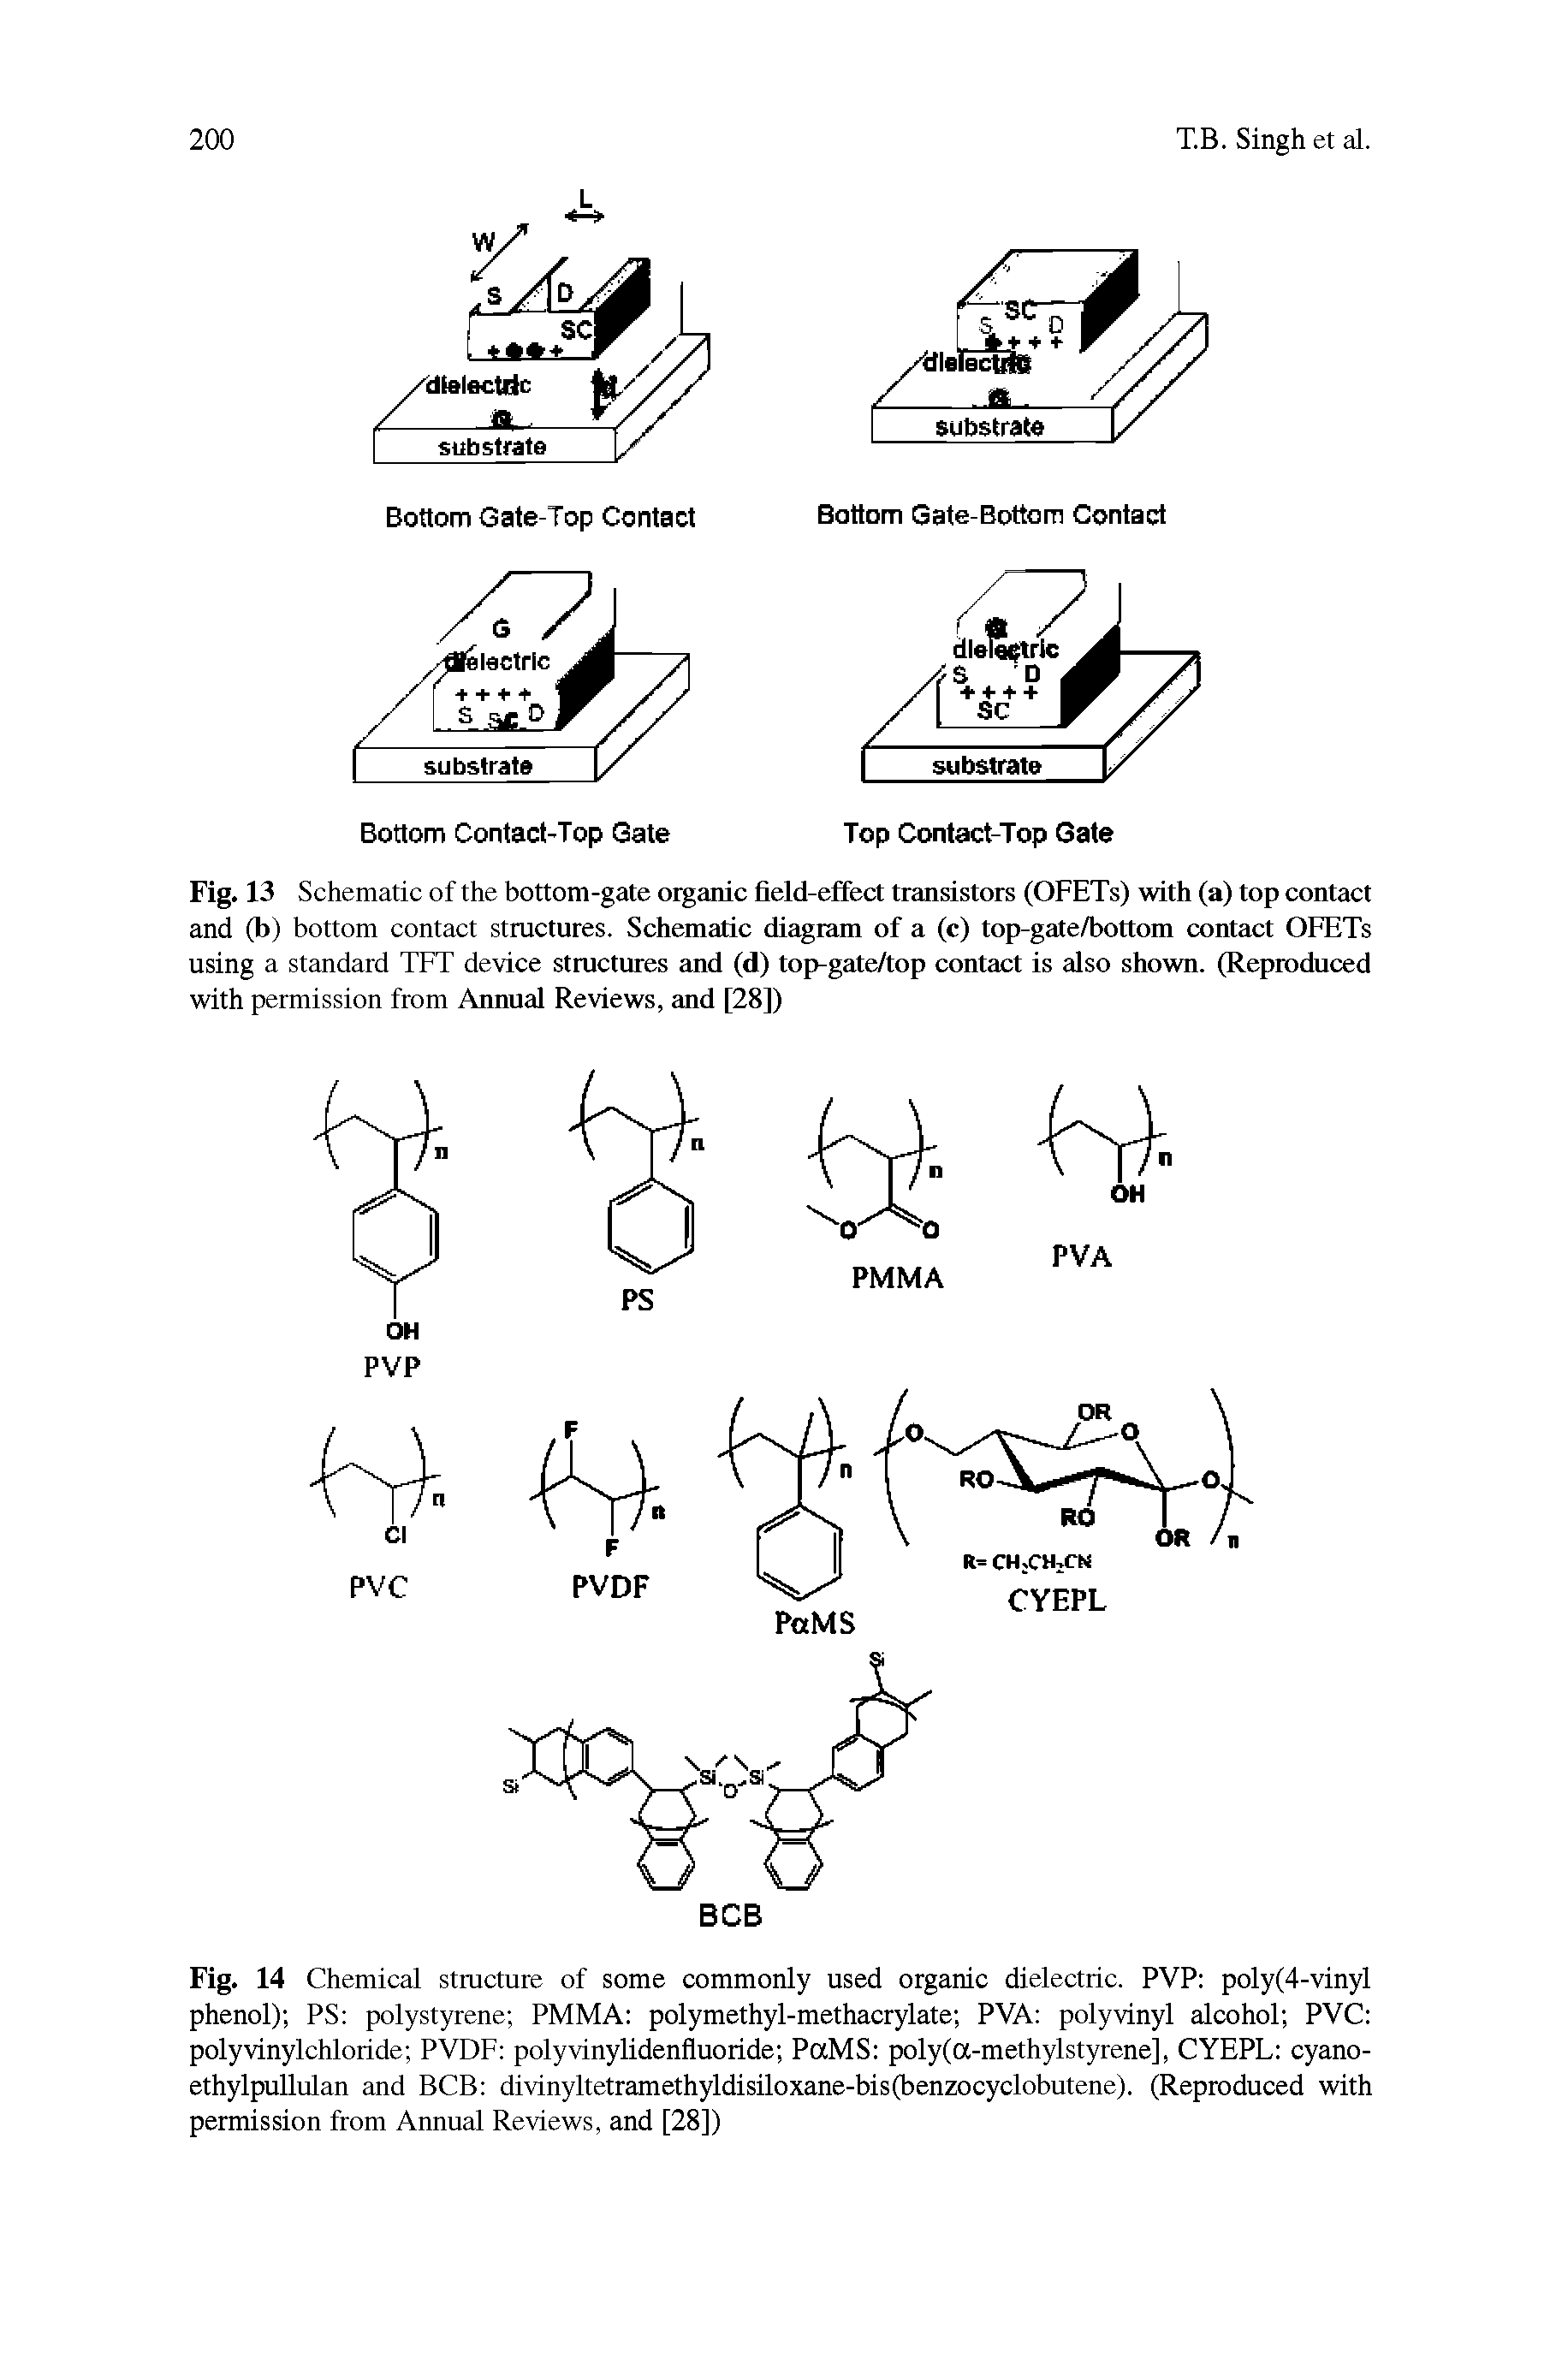 Fig. 14 Chemical structure of some commonly used organic dielectric. PVP poly(4-vinyl phenol) PS polystyrene PMMA polymethyl-methacrylate PVA polyvinyl alcohol PVC polyvinylchloride PVDF polyvinylidenfluoride PaMS poly(a-methylstyrene], CYEPL cyano-ethylpullulan and BCB divinyltetramethyldisiloxane-bis(benzocyclobutene). (Reproduced with permission from Annual Reviews, and [28])...